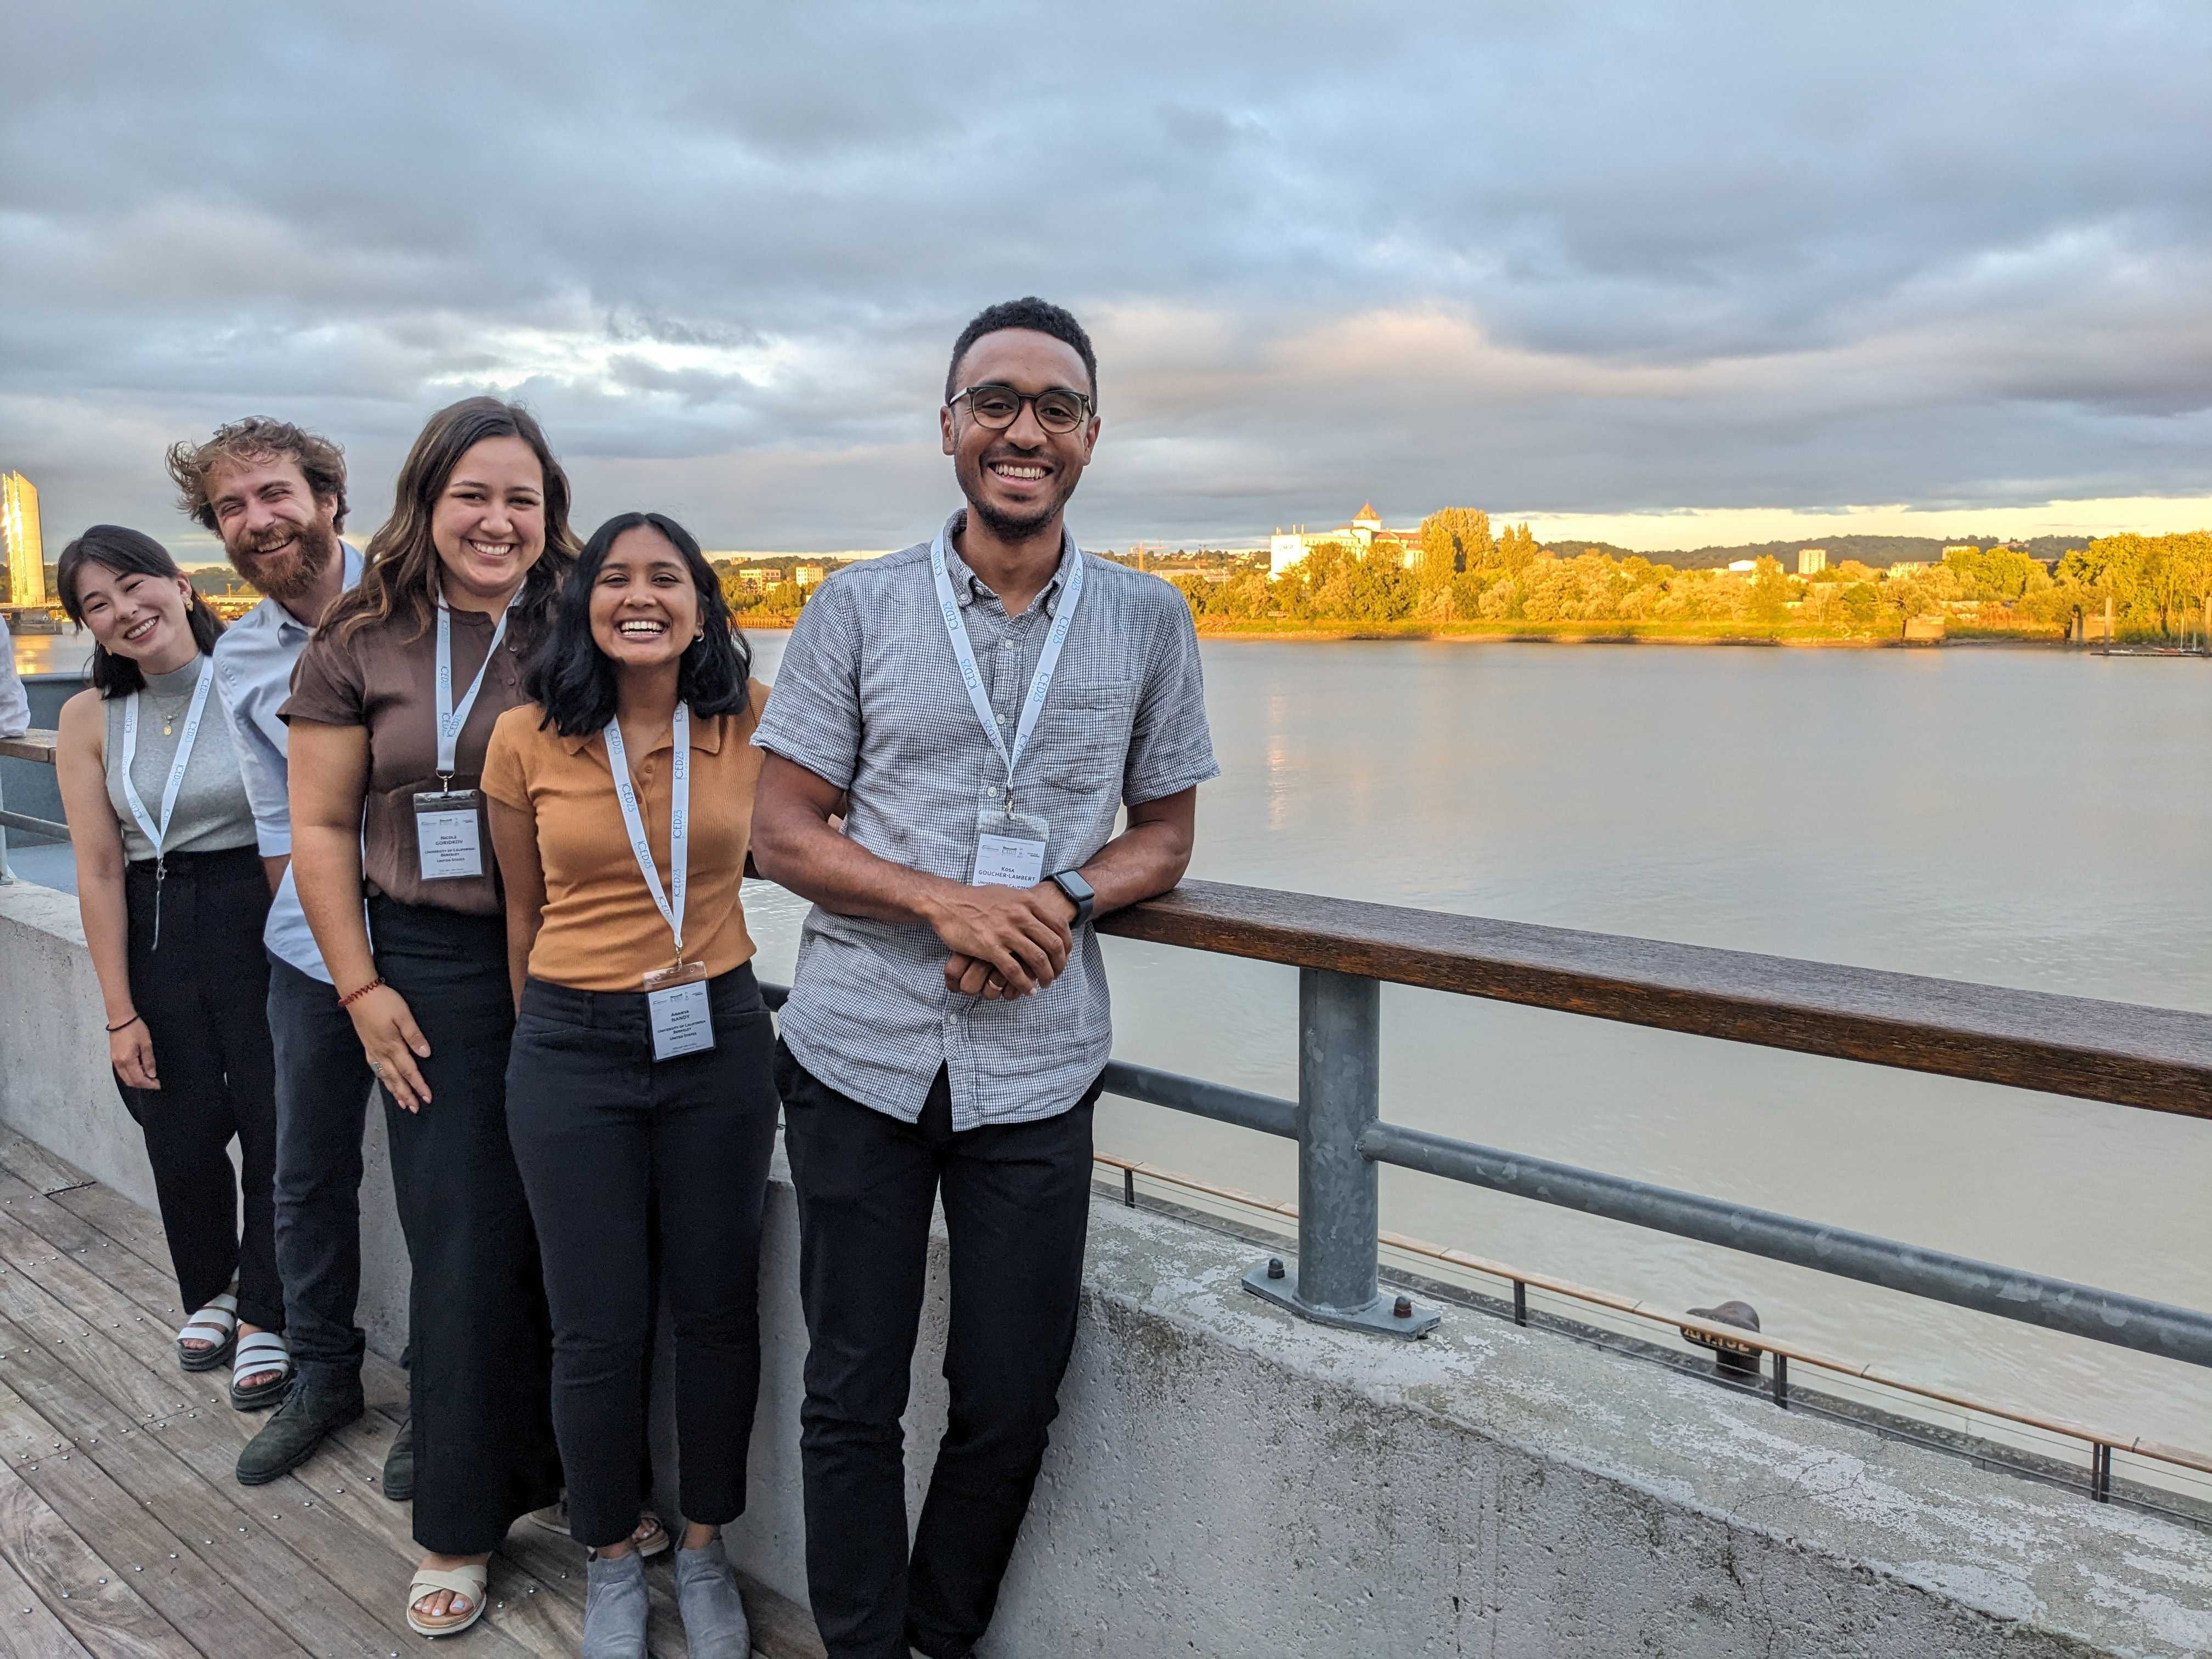 from left to right, Elisa, Samuele, Nicole, me (Ananya), and Kosa in front of railing with Garonne river in the background